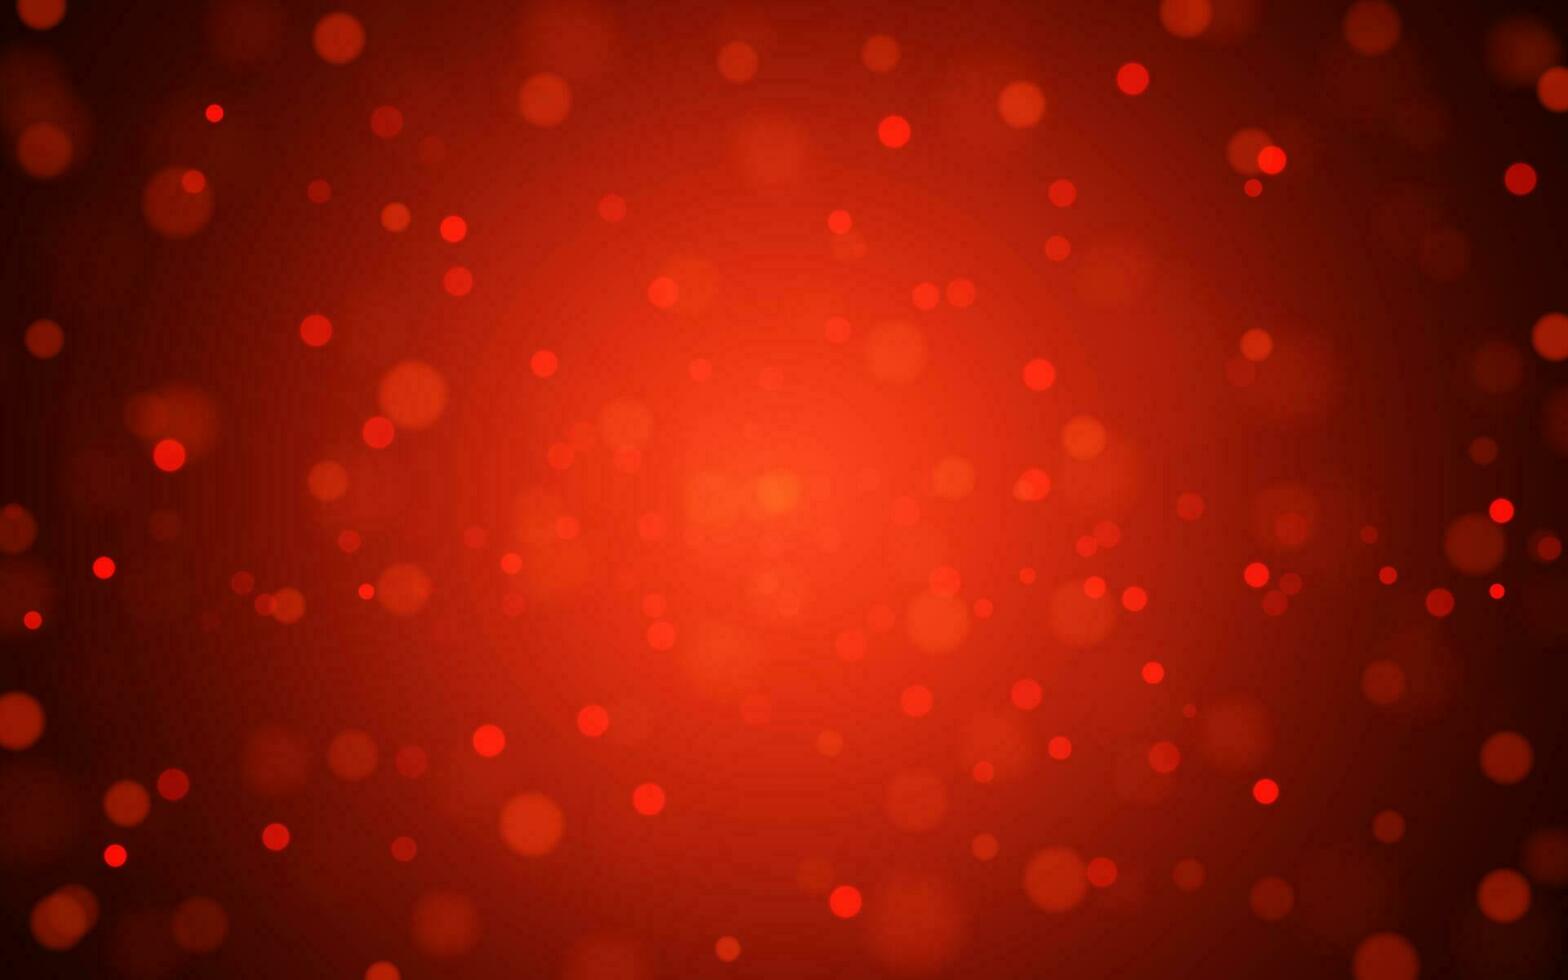 Red color bokeh soft light abstract backgrounds, Vector eps 10 illustration bokeh particles, Backgrounds decoration